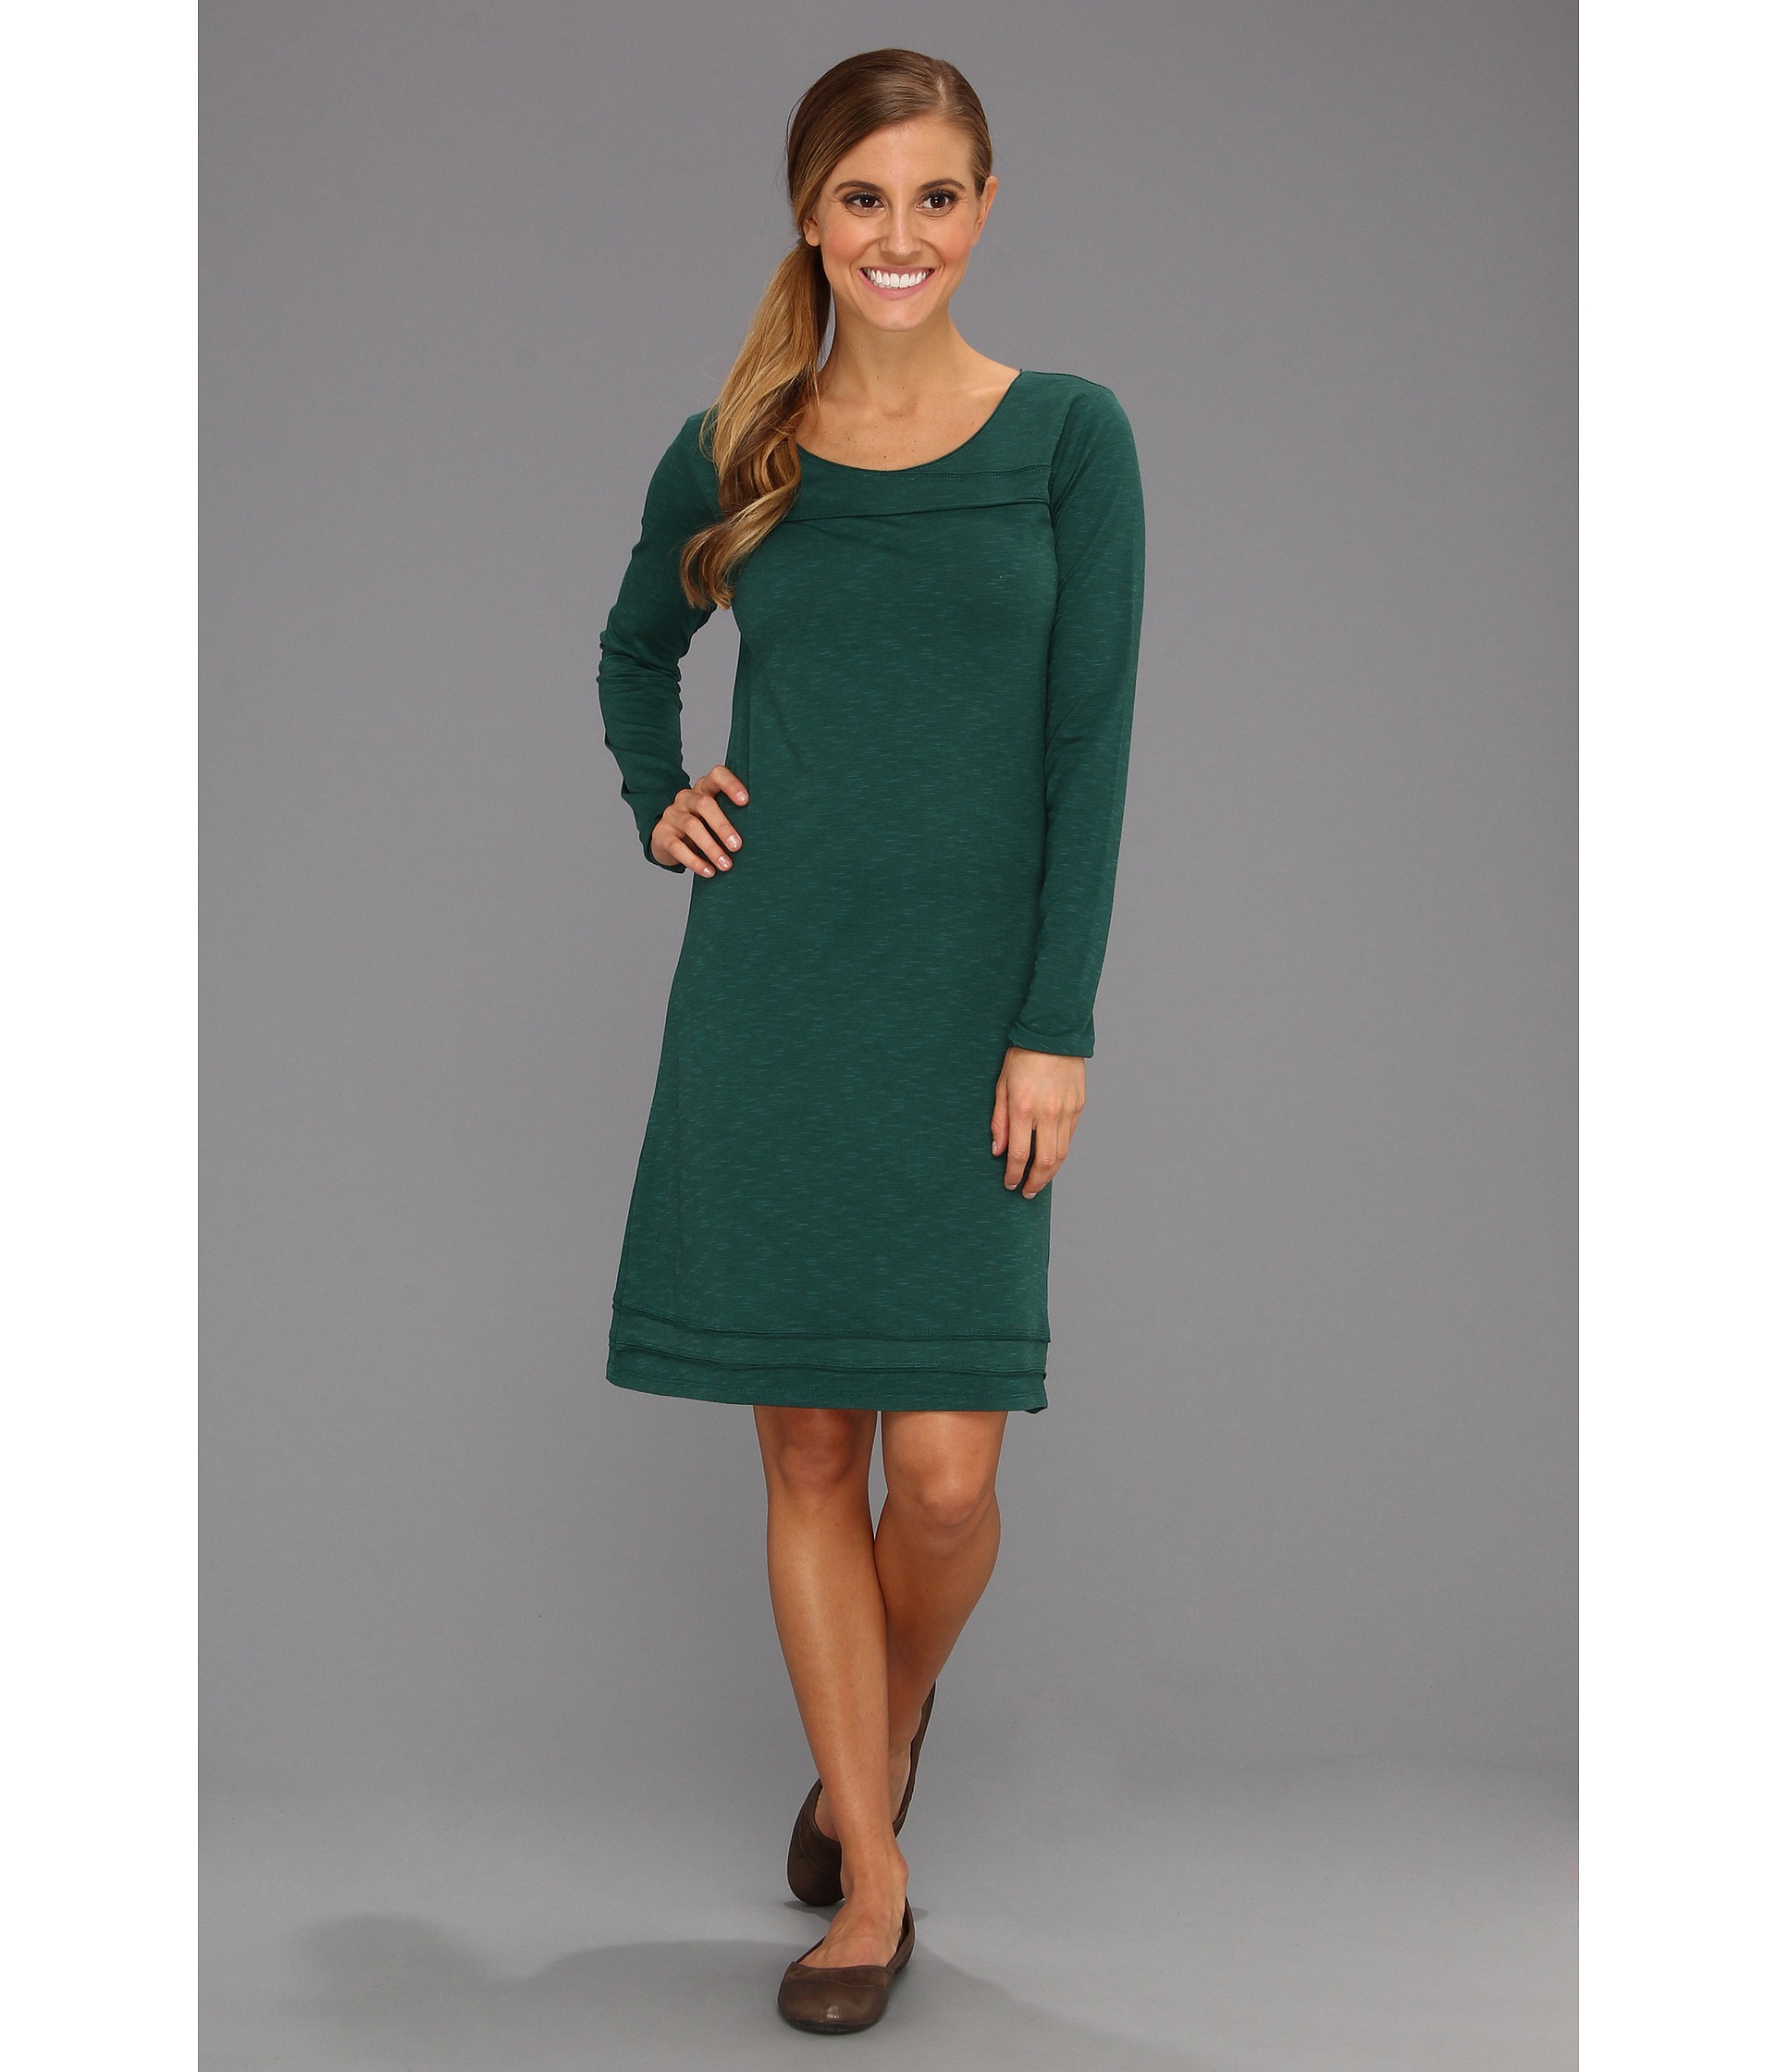 No results for horny toad oolong dress bottle green - Search Zappos.com